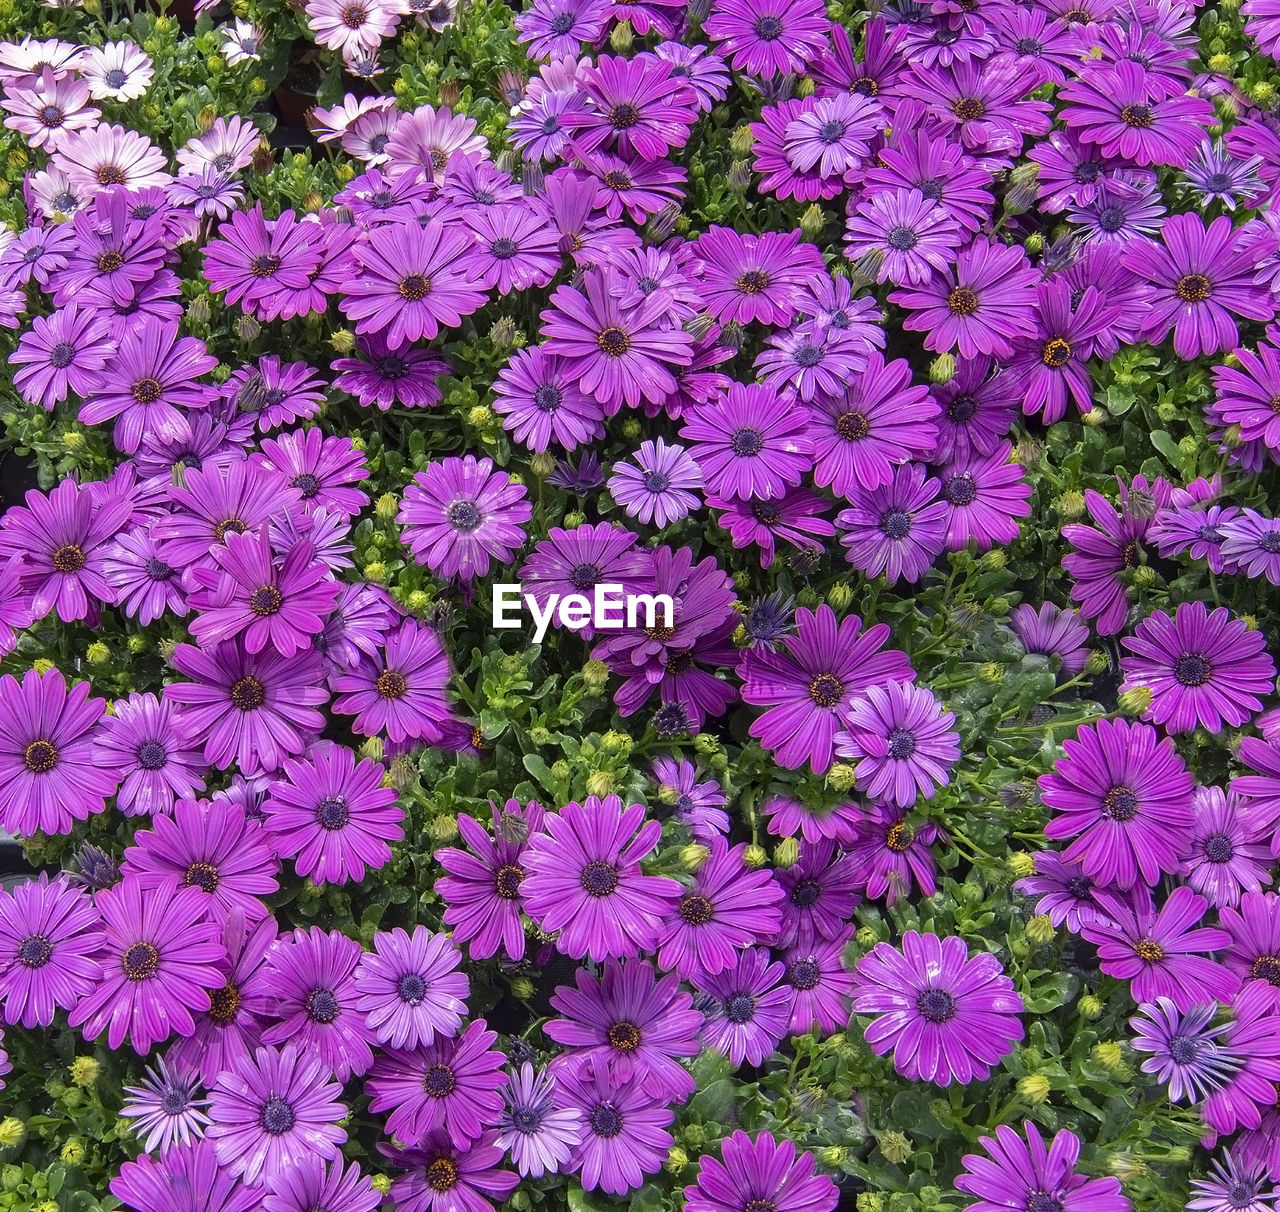 HIGH ANGLE VIEW OF PURPLE FLOWERING PLANTS